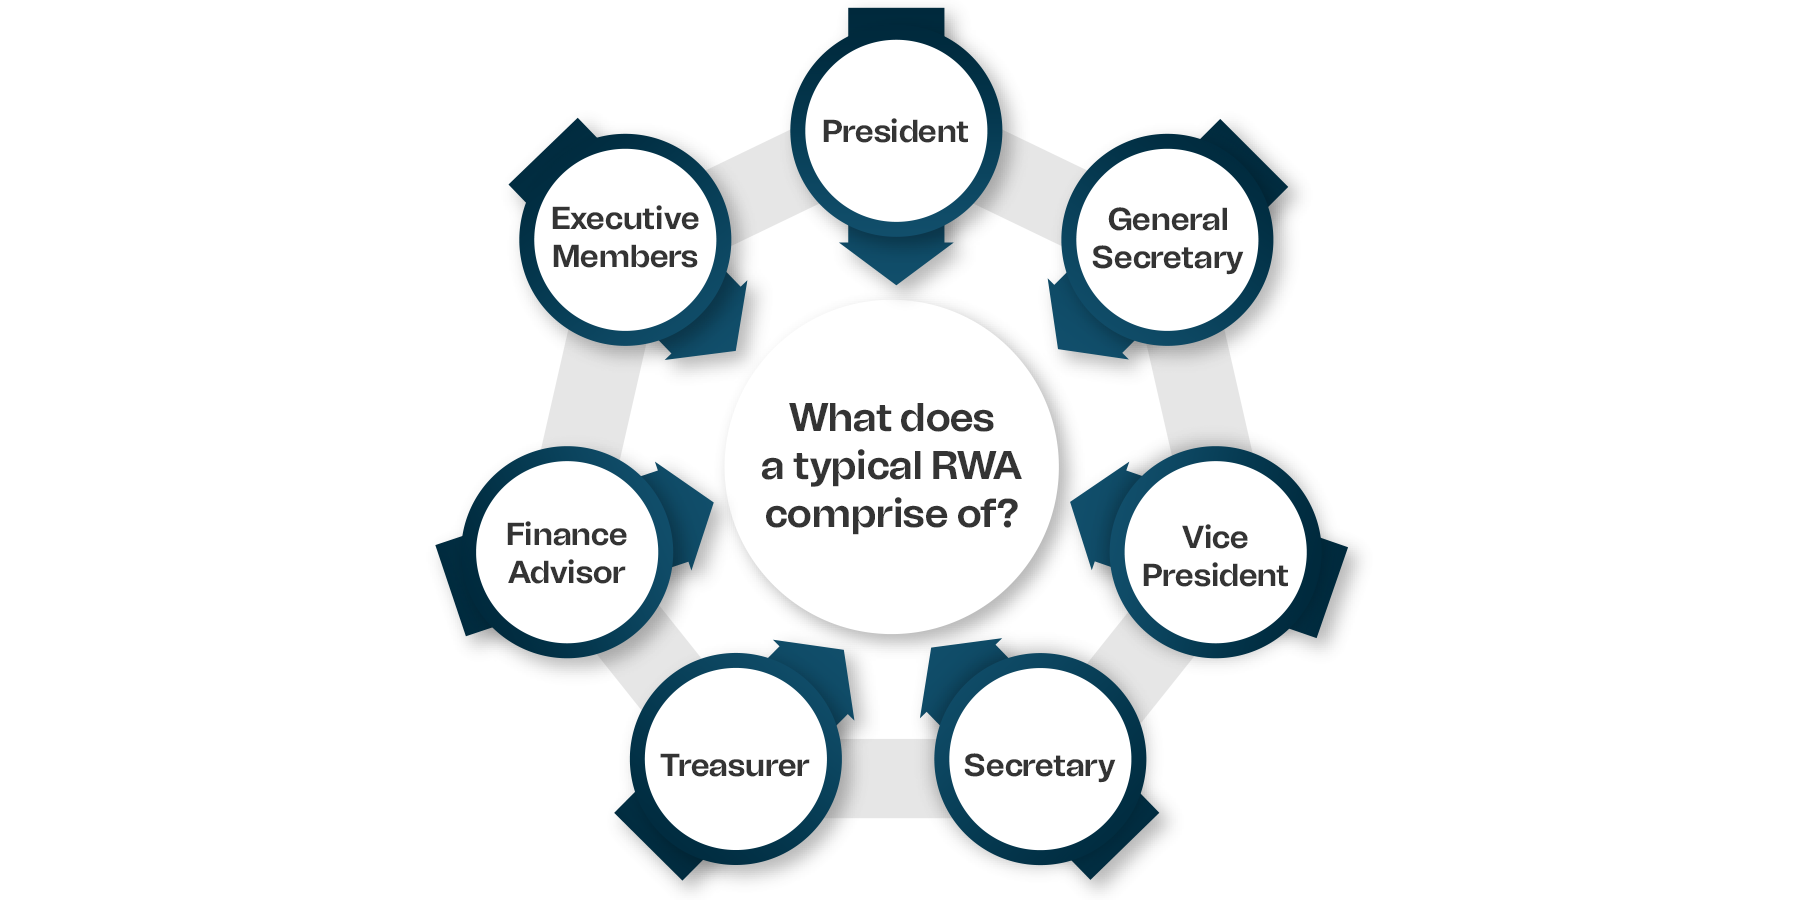 What does a typical RWA comprise of?